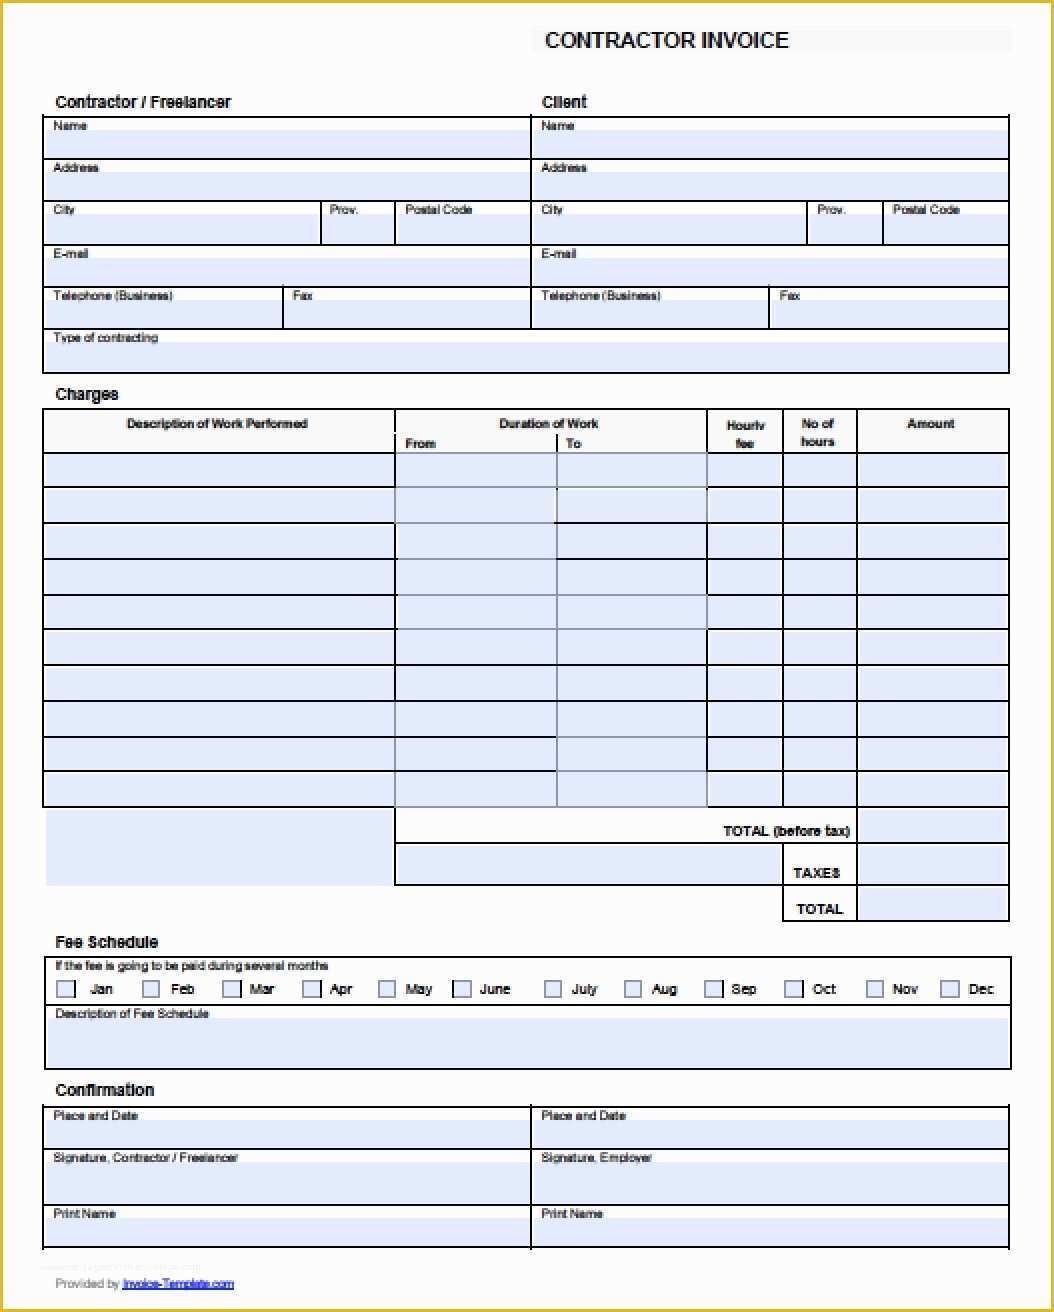 Free Contractor Invoice Template Pdf Of Free Contractor Invoice Template Excel Pdf